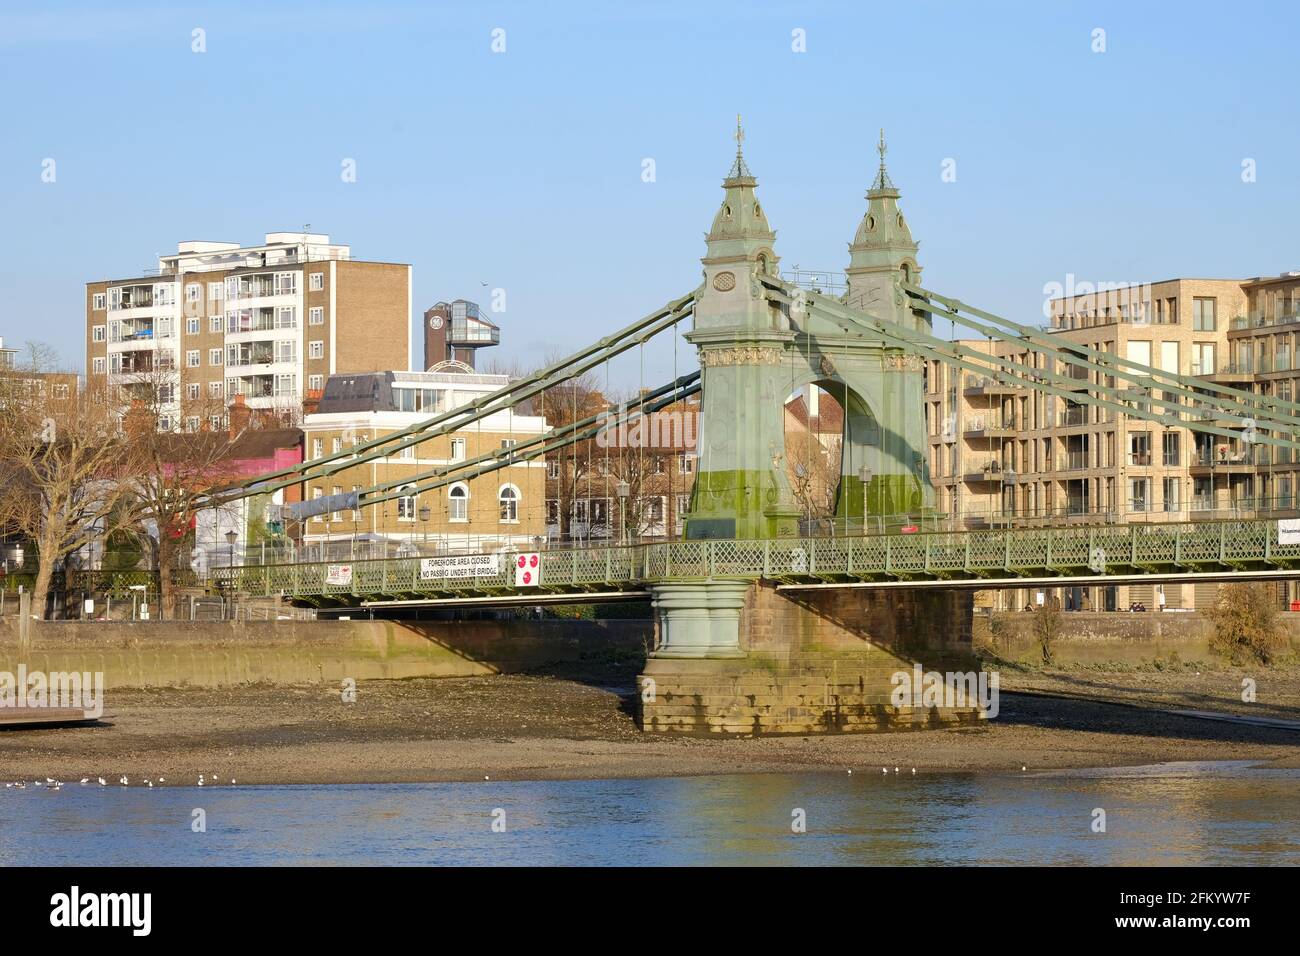 The northern section of Hammersmith Bridge. The bridge has been closed to vehicles since April 2019 and to pedestrians August 2020. Stock Photo